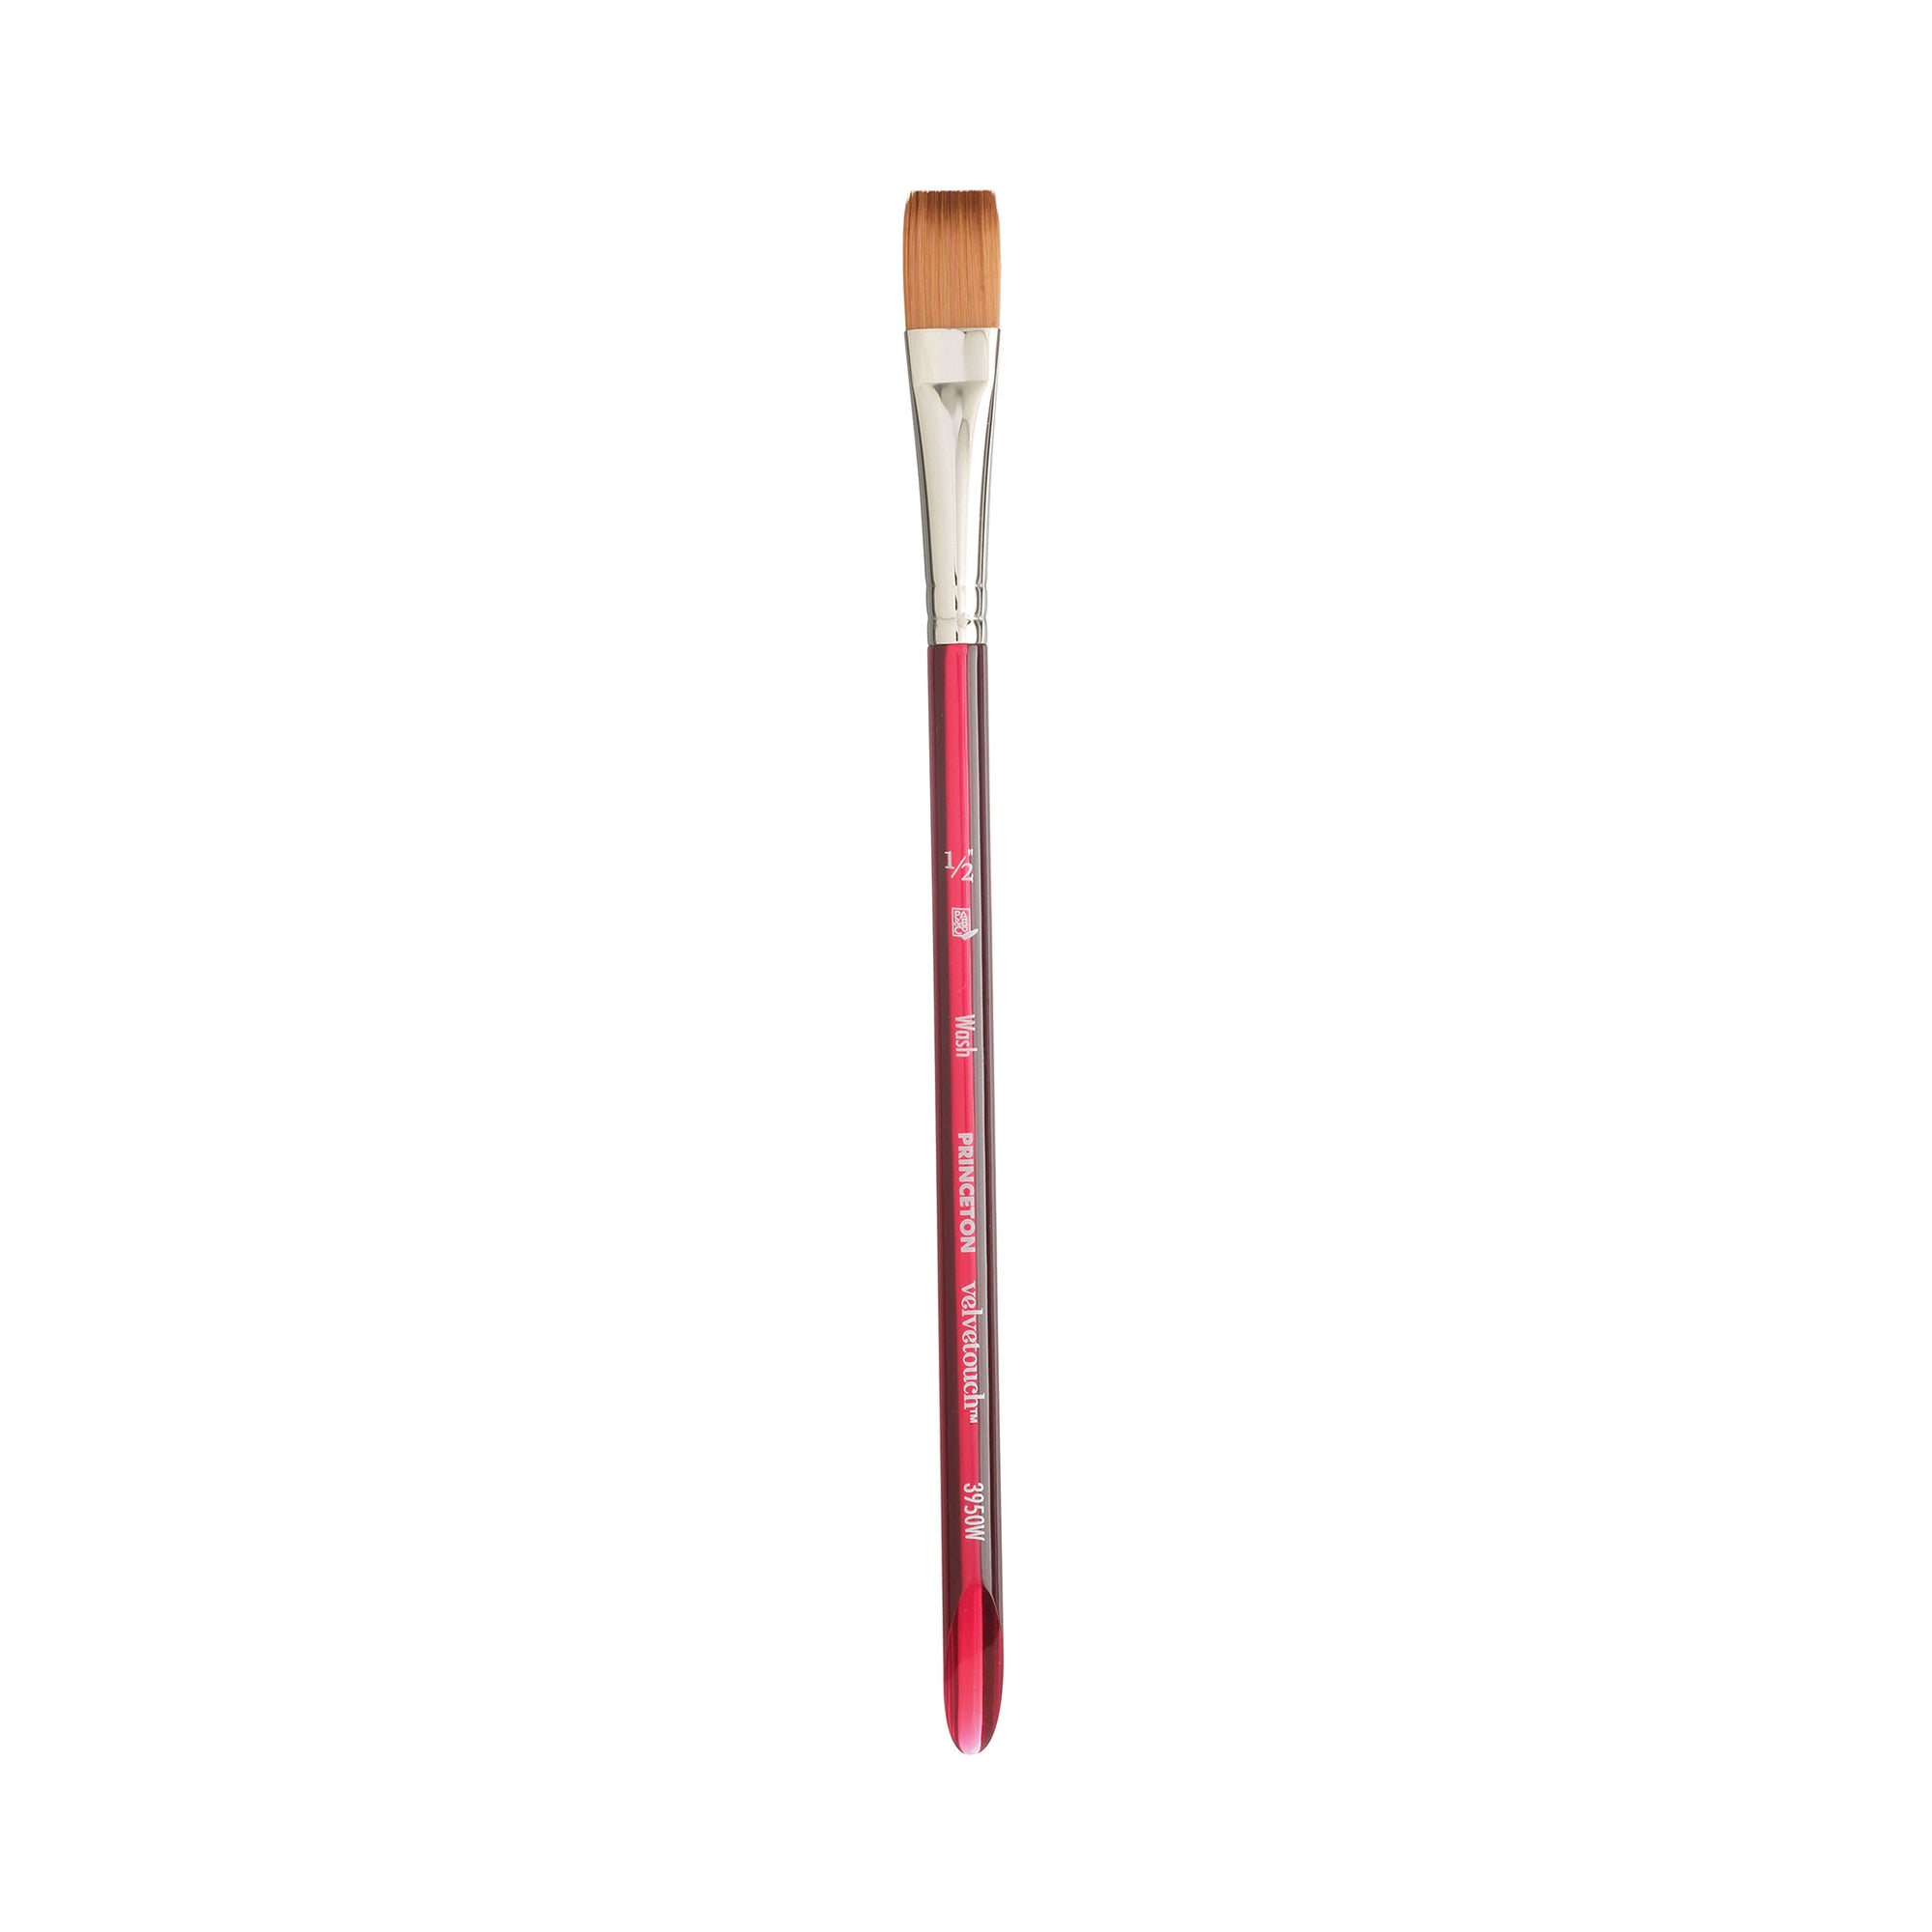 Princeton Velvetouch Blooms Brush Long Handle Size 12 - Professional Artist Brushes for Mixed Media Acrylic Oil